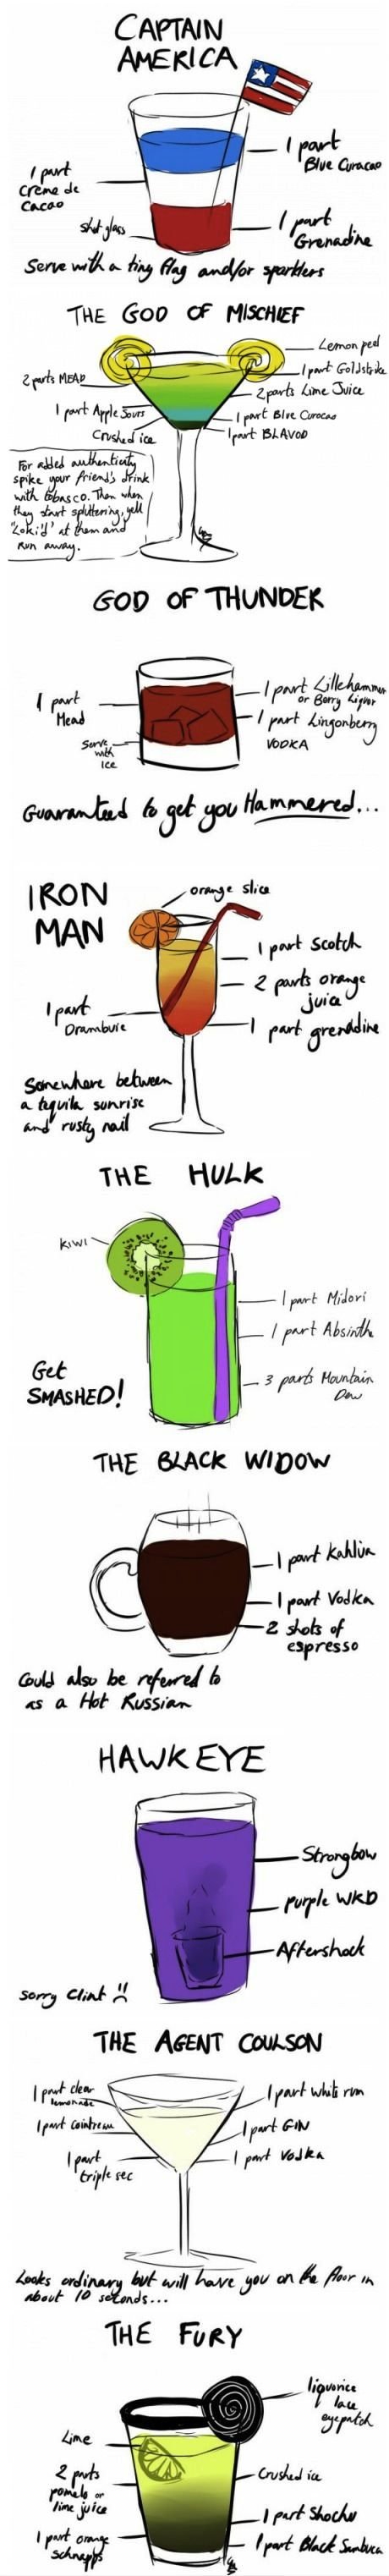 The Avengers mixed drinks.